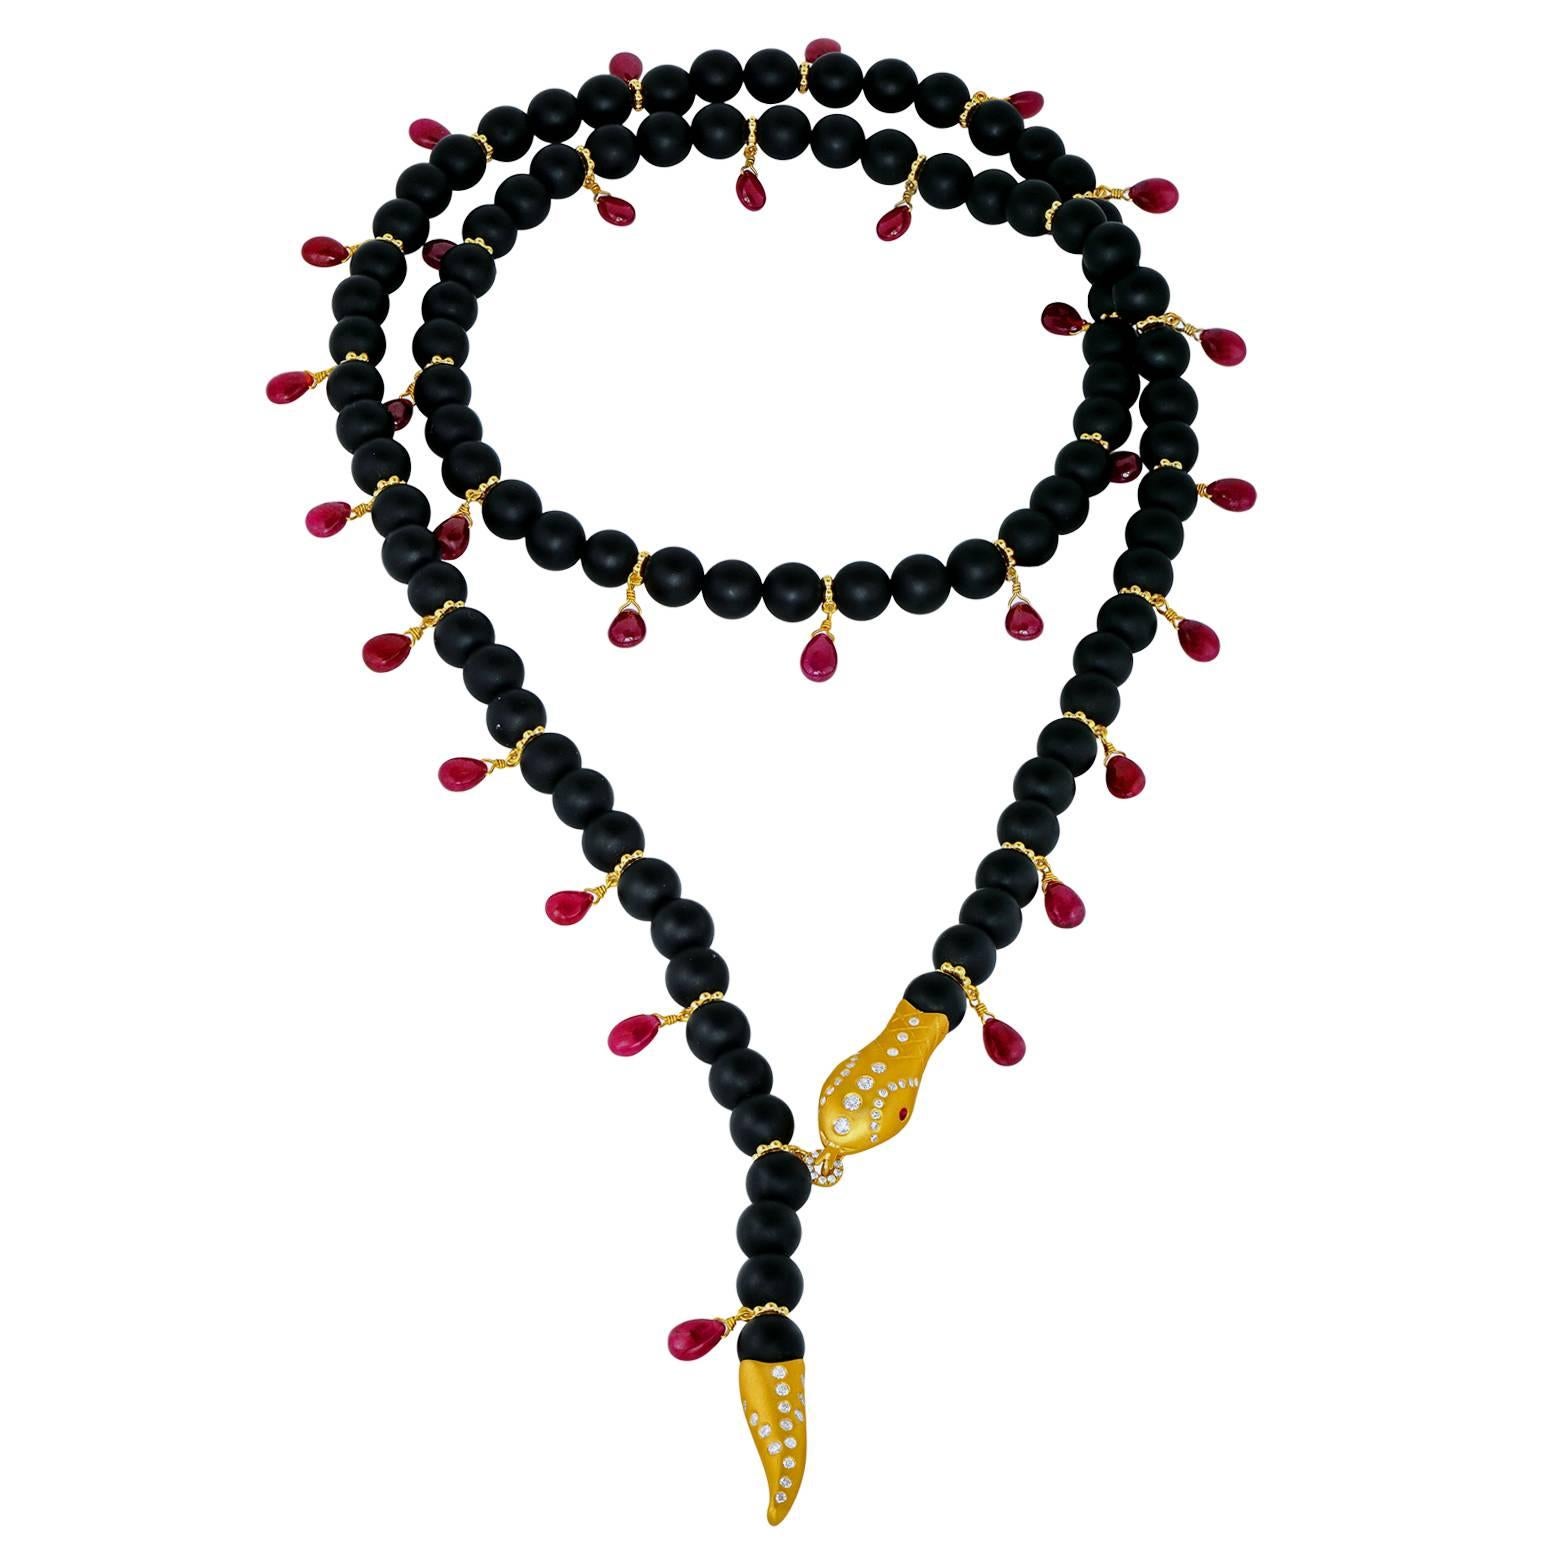 One-of-a-Kind  Rattlesnake Necklace handcrafted with smooth, satin-finished black onyx and ruby briolettes attached to 18k yellow gold rondels, and showcasing a diamond-encrusted (0.63tcw G/H, vs2/si1) 22k yellow gold rattlesnake tail and head with